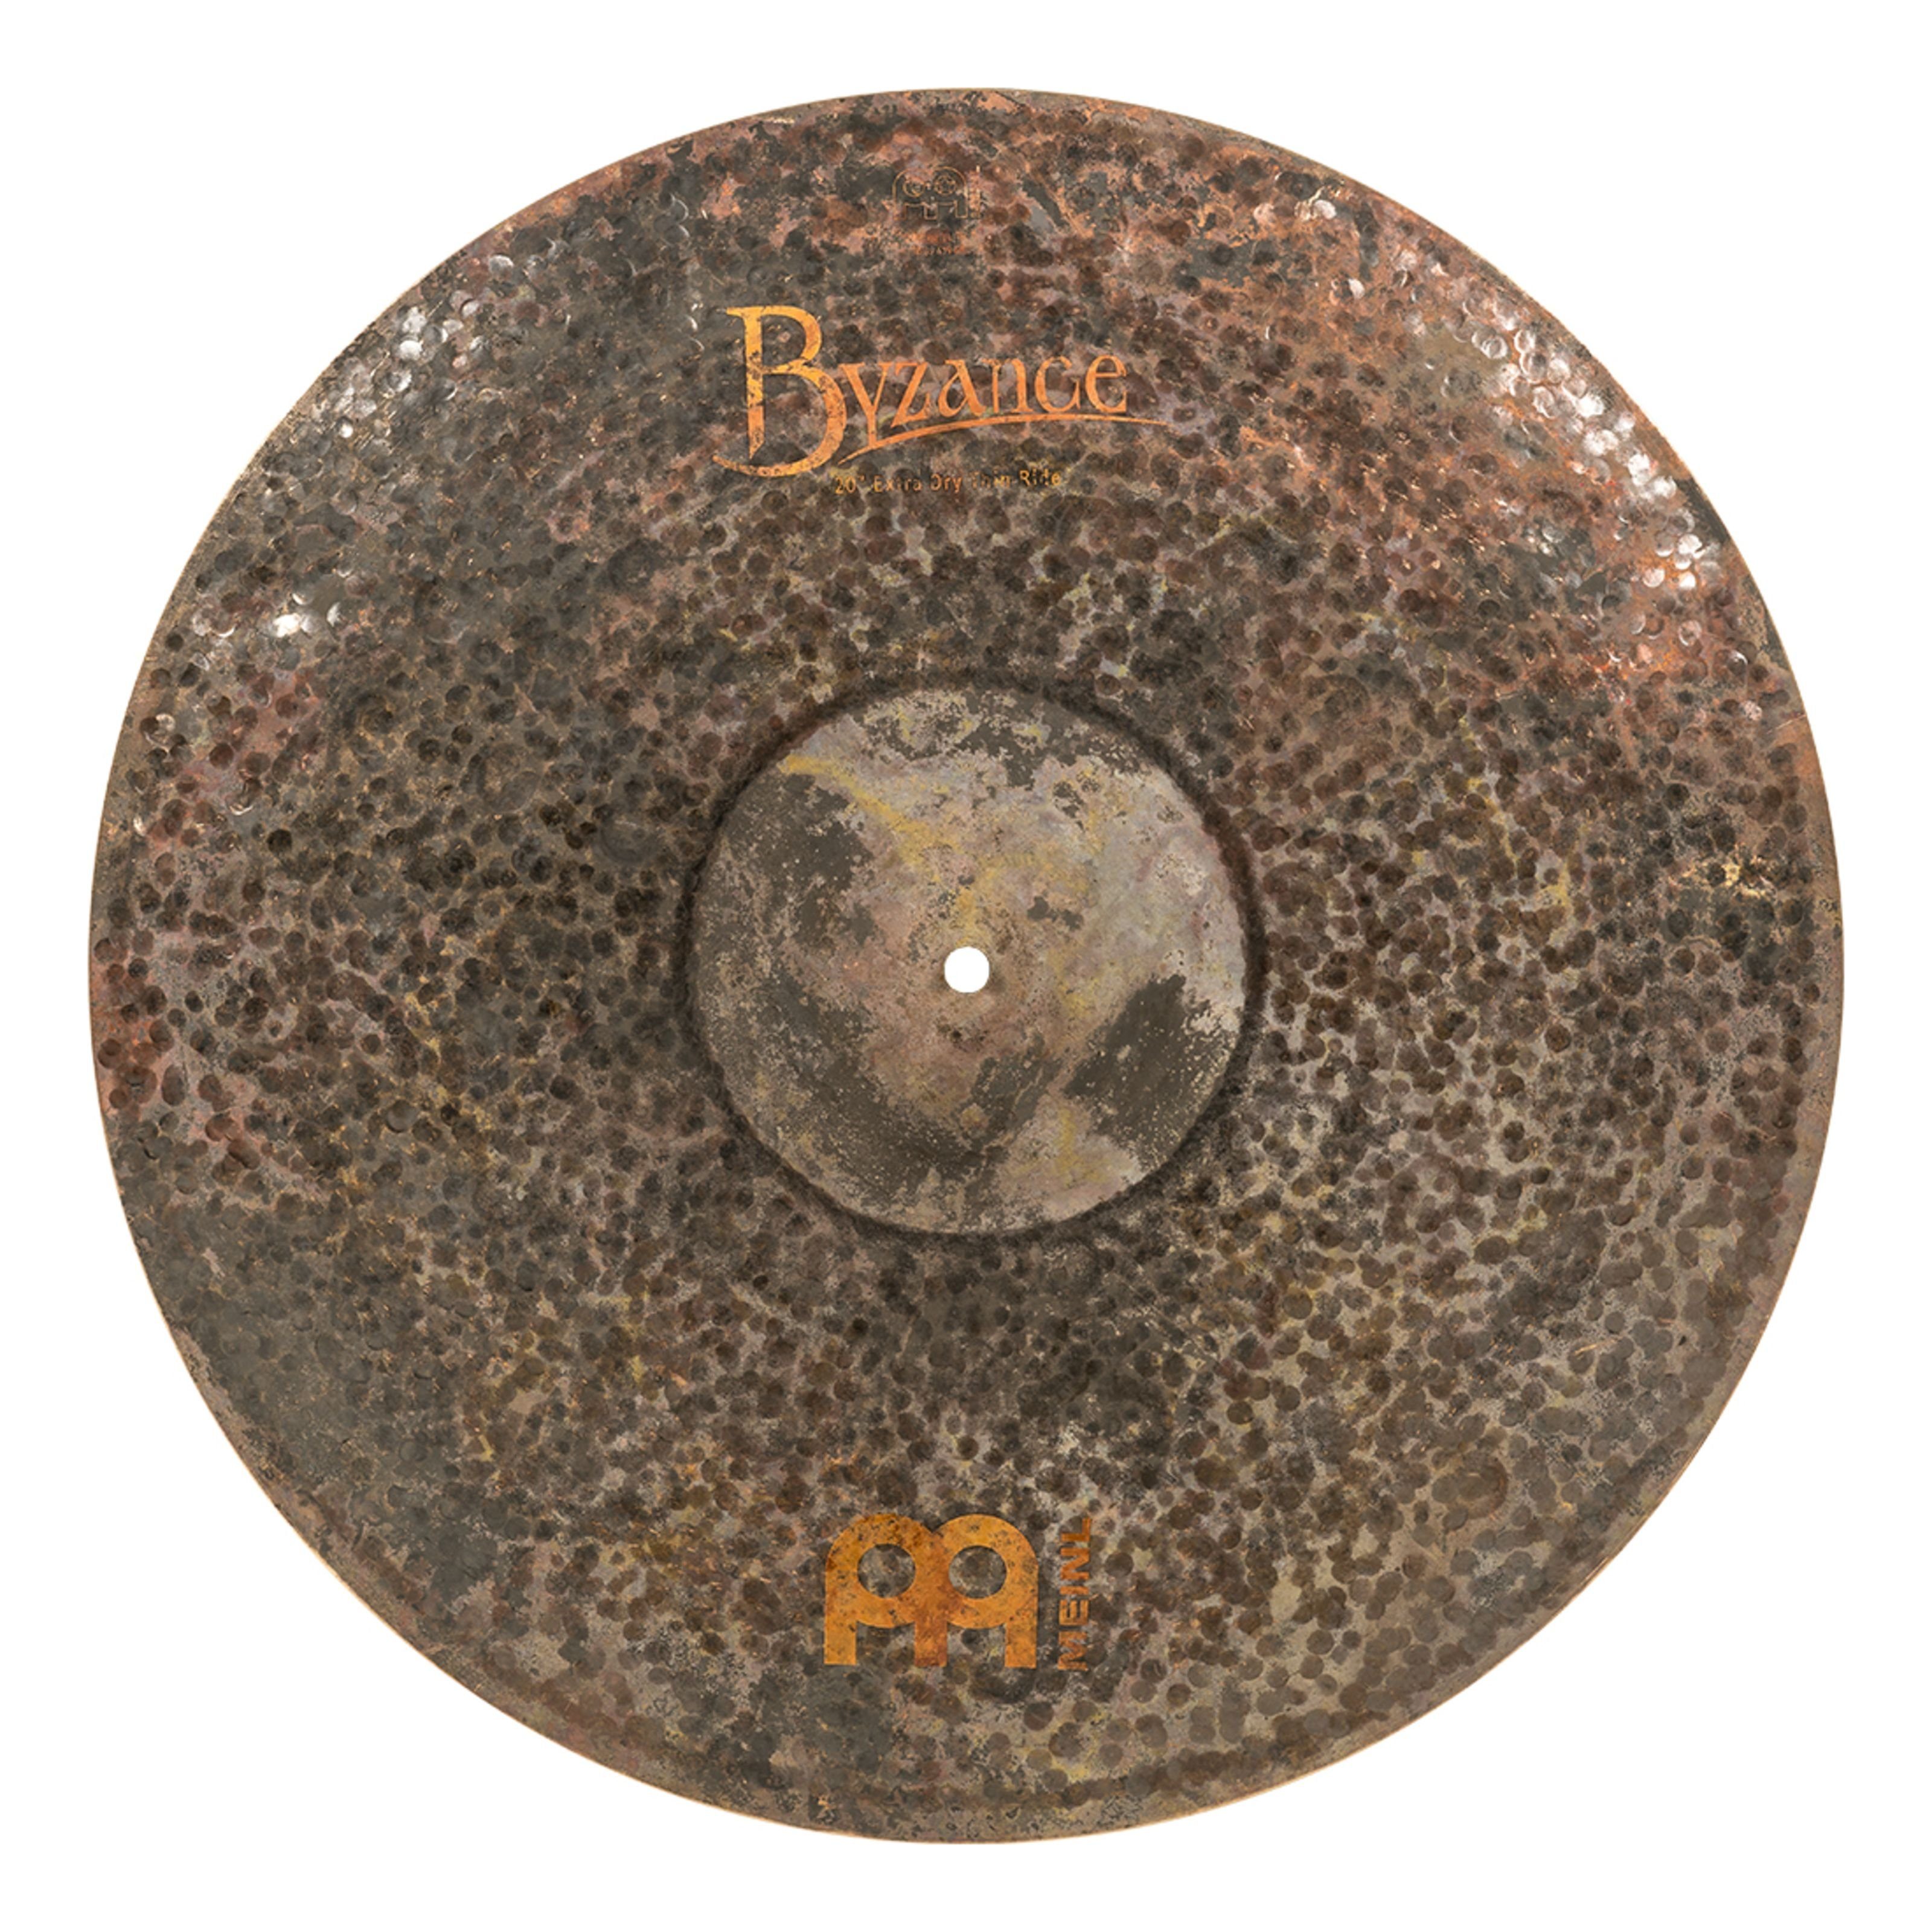 Meinl Percussion Spielzeug-Musikinstrument, Byzance Thin Ride 20", B20EDTR, Extra Dry - Ride Cymbal